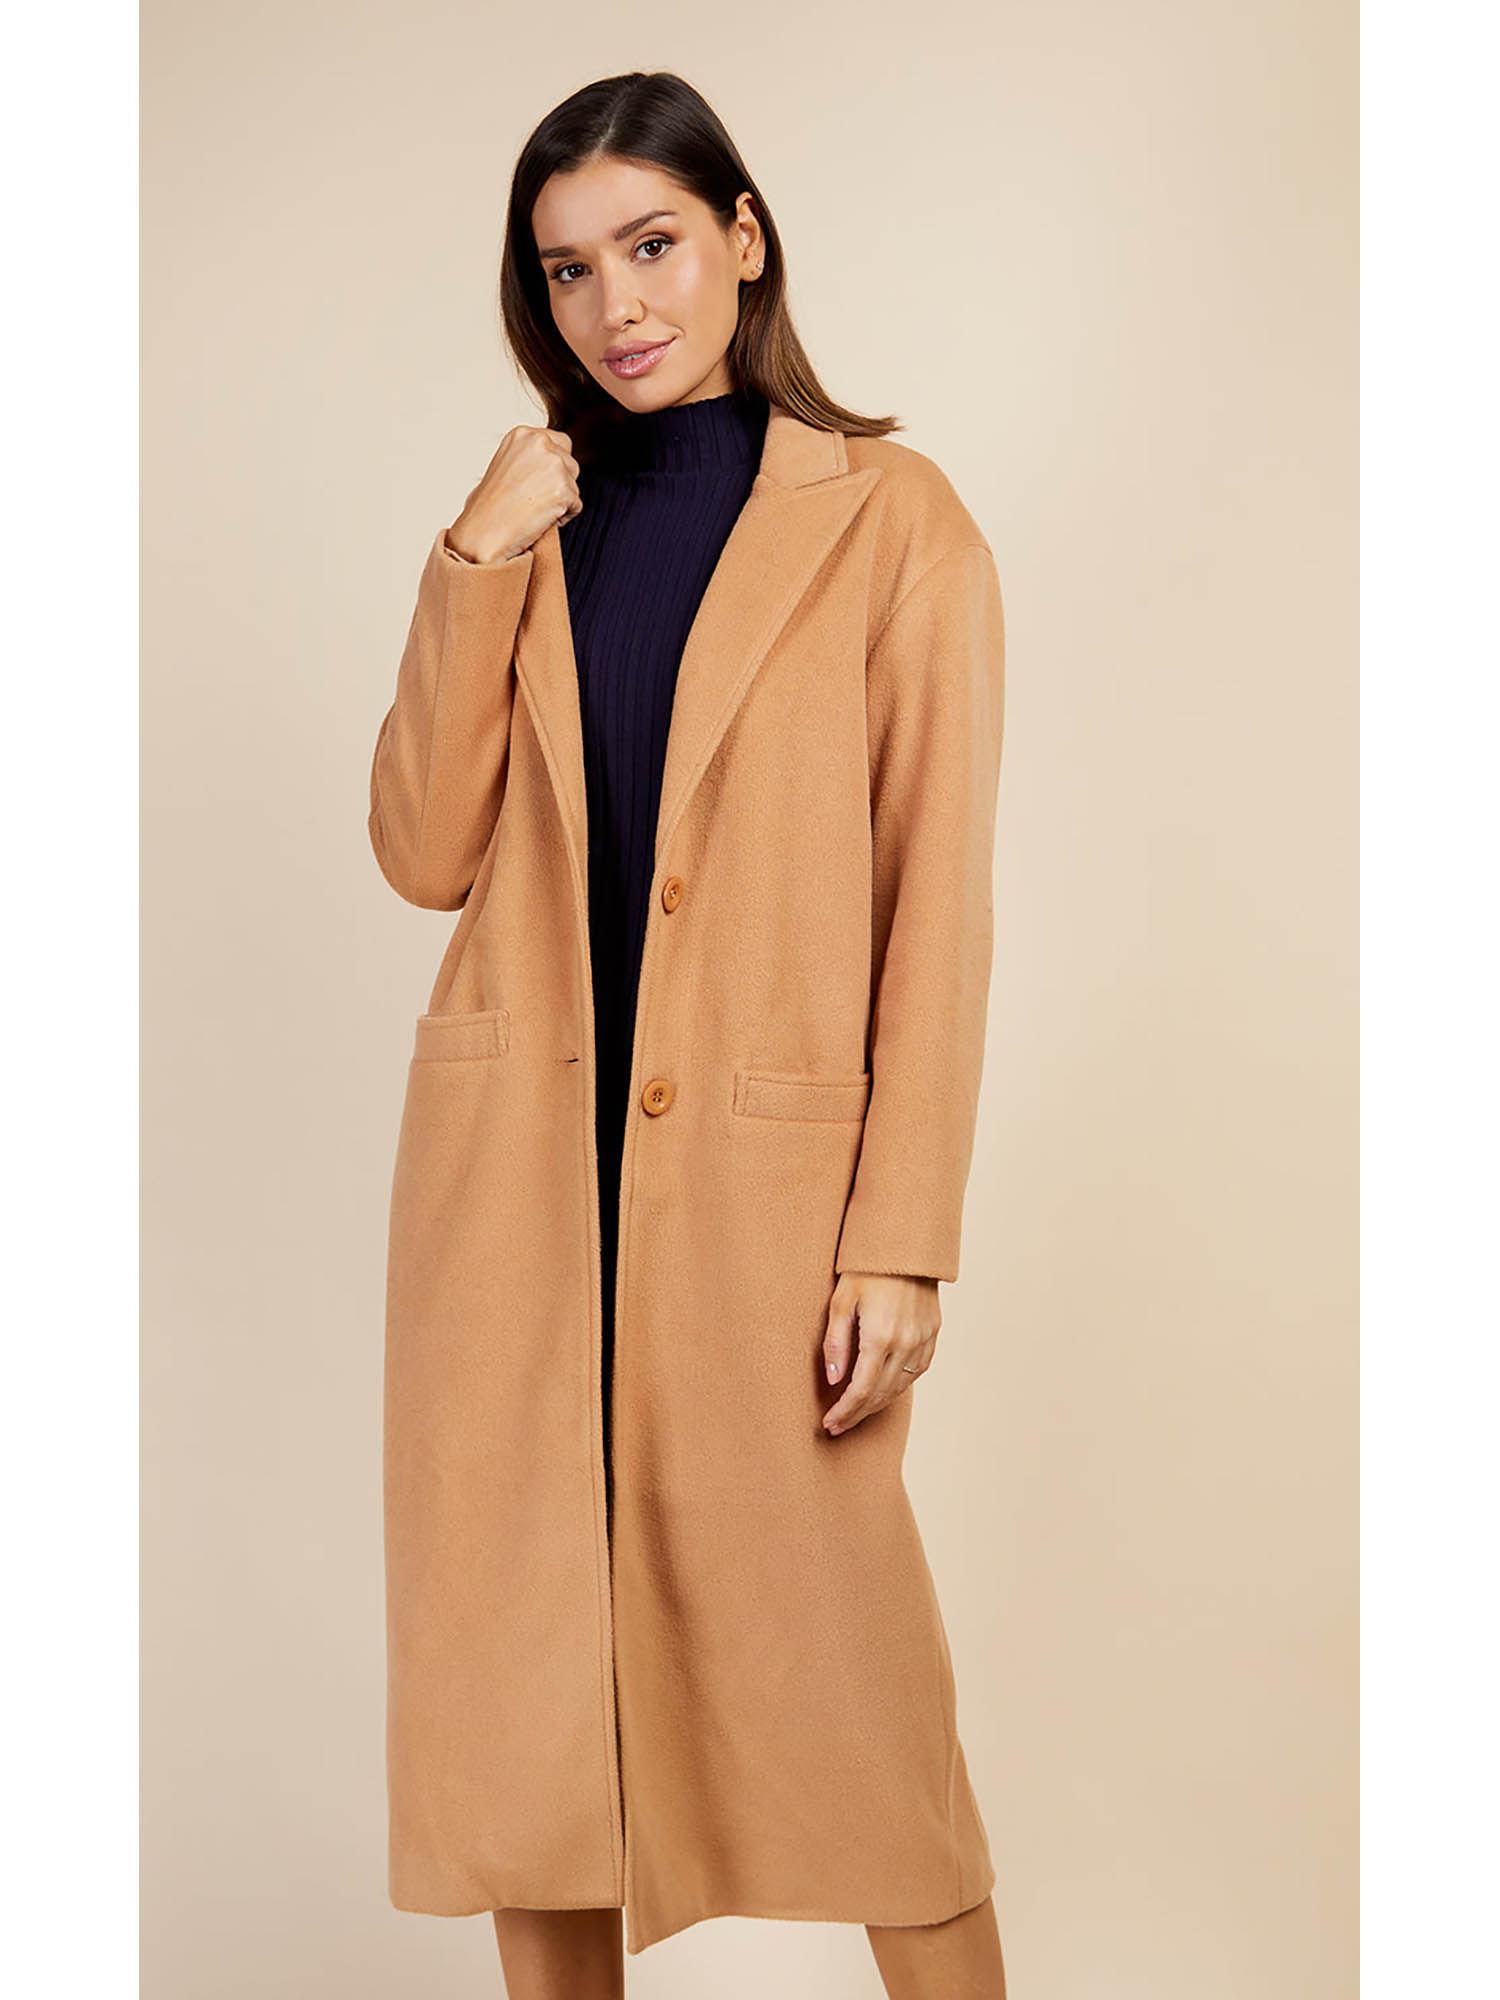 camel over coat by vogue williams